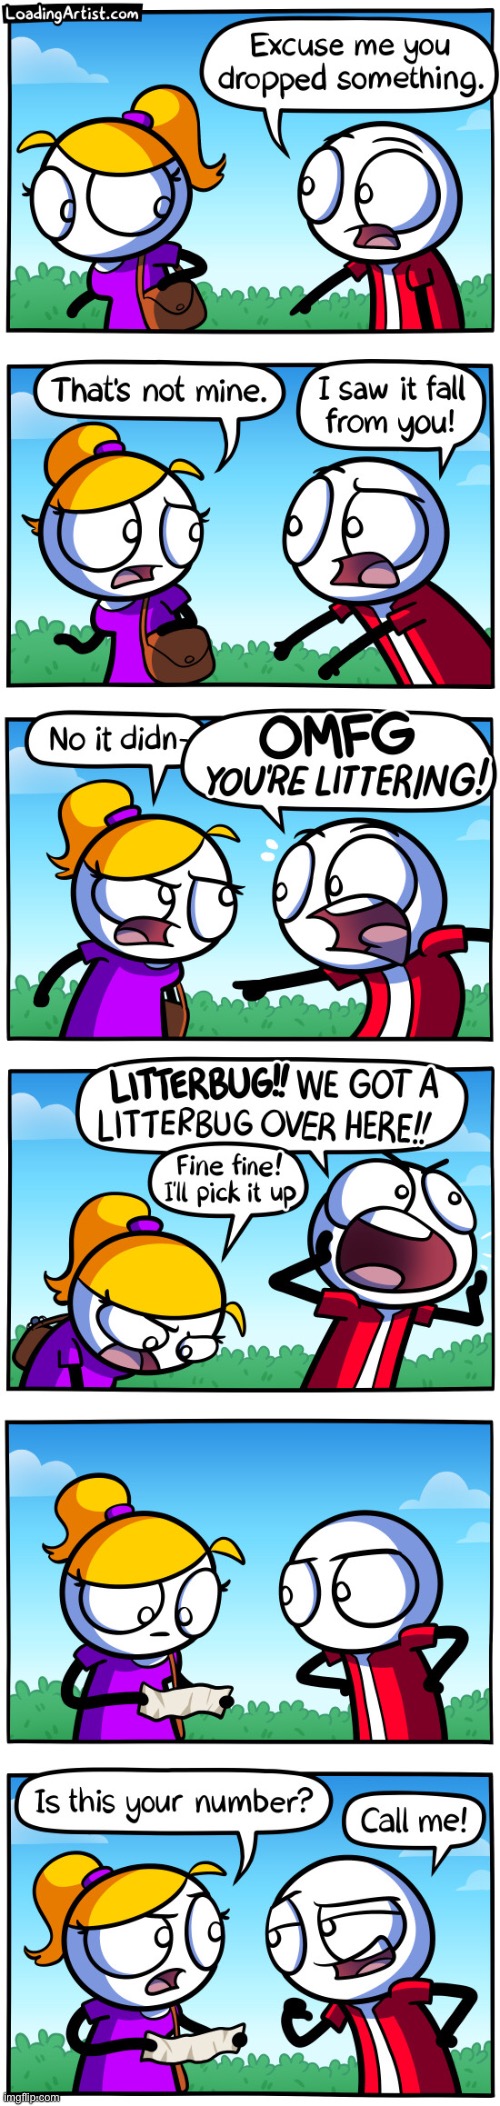 “LITTERBUG!” | image tagged in memes,funny,comics,number,littering,lol | made w/ Imgflip meme maker